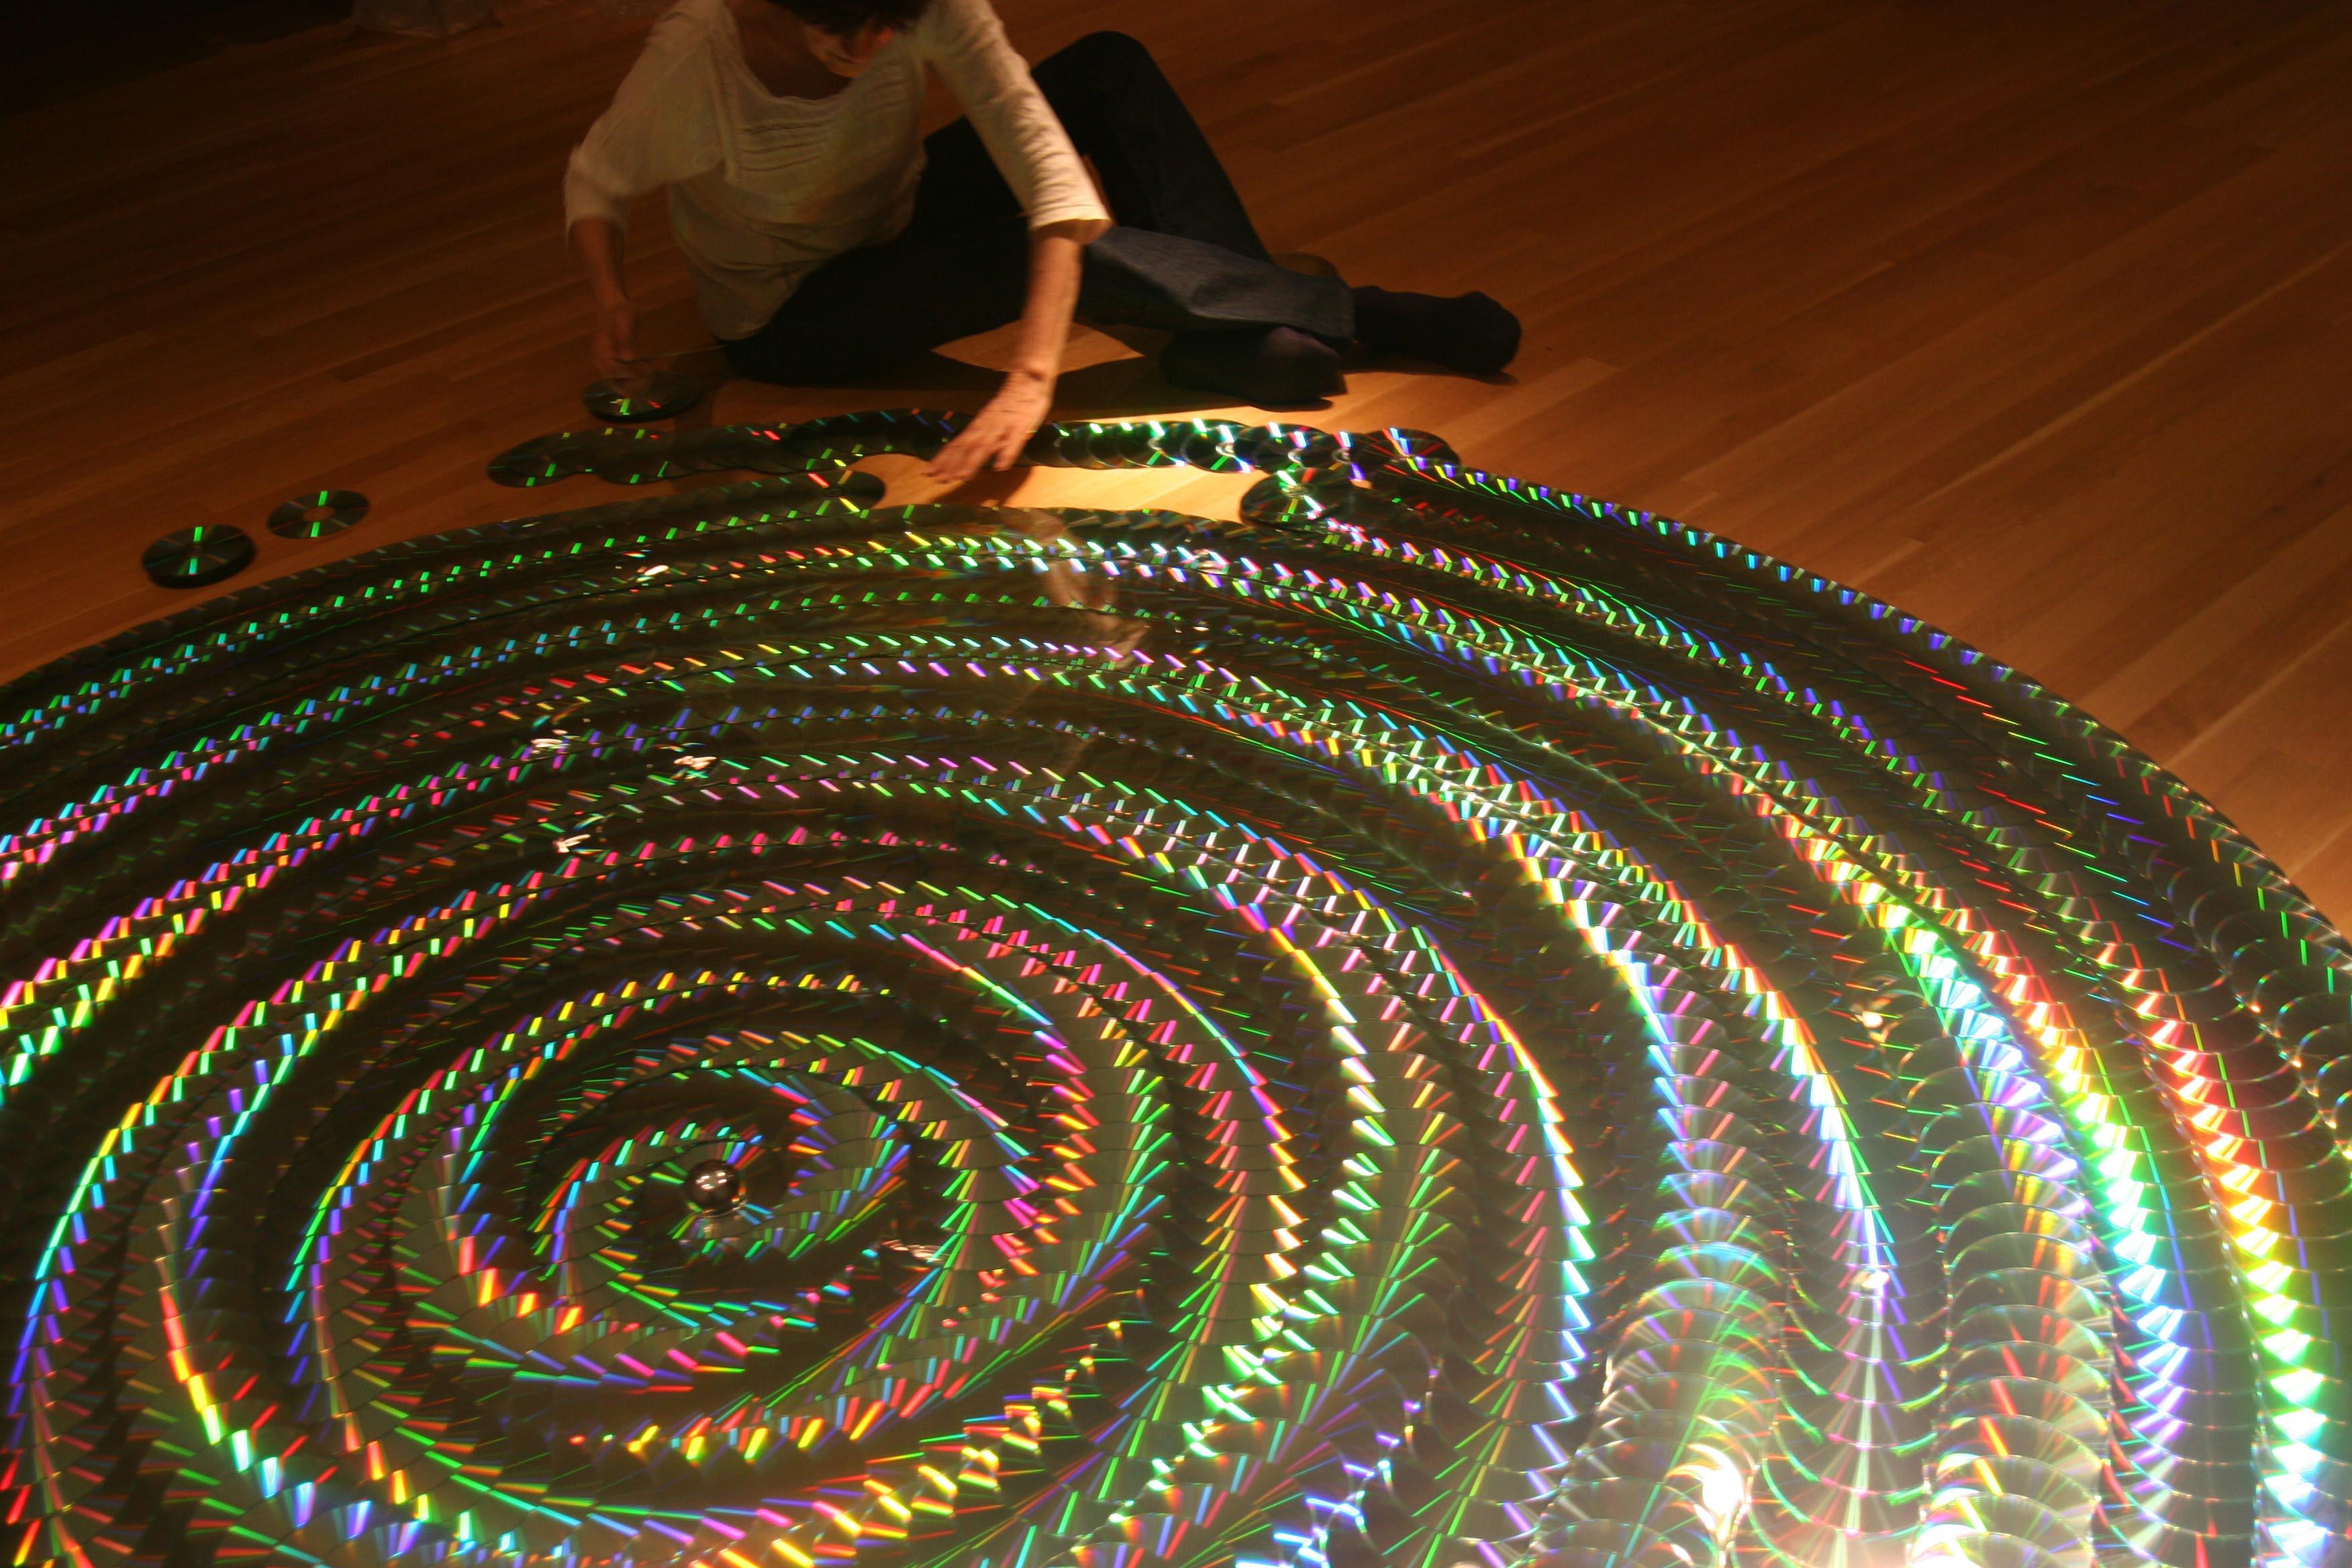 Andra Samelson, Pemarom, 2013-2022, 1300 + cds, Edition of 5, Abstract Sculpture For Sale 10